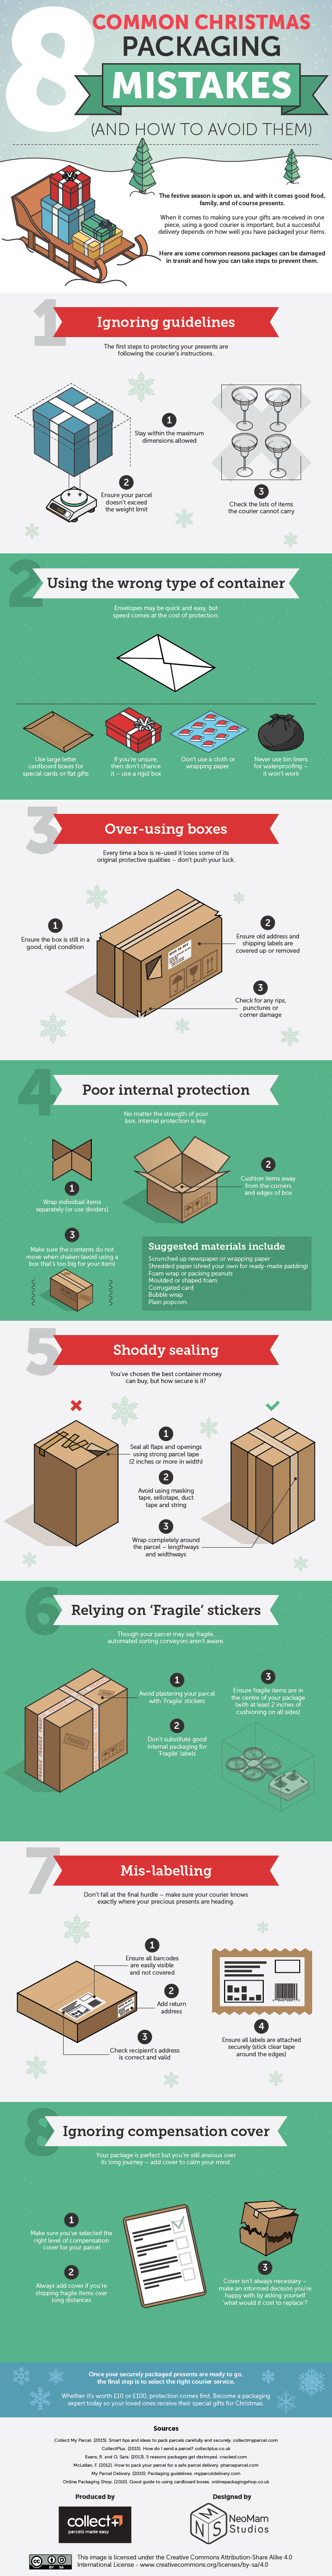 Packaging-mistakes-Christmas-edition-3